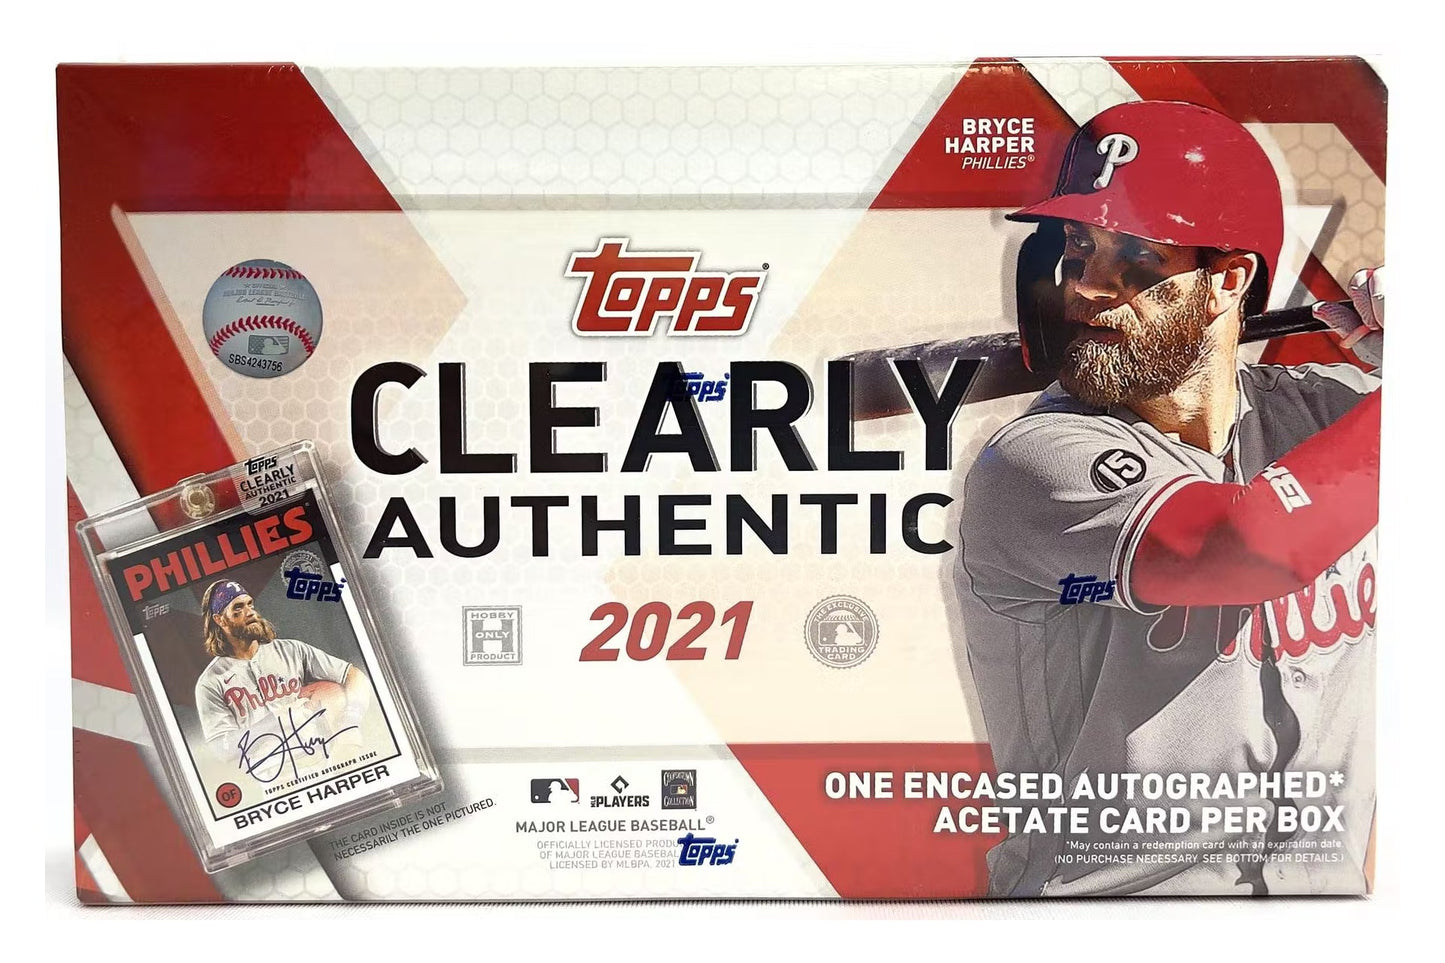 2021 Topps Clearly Authentic Baseball Box